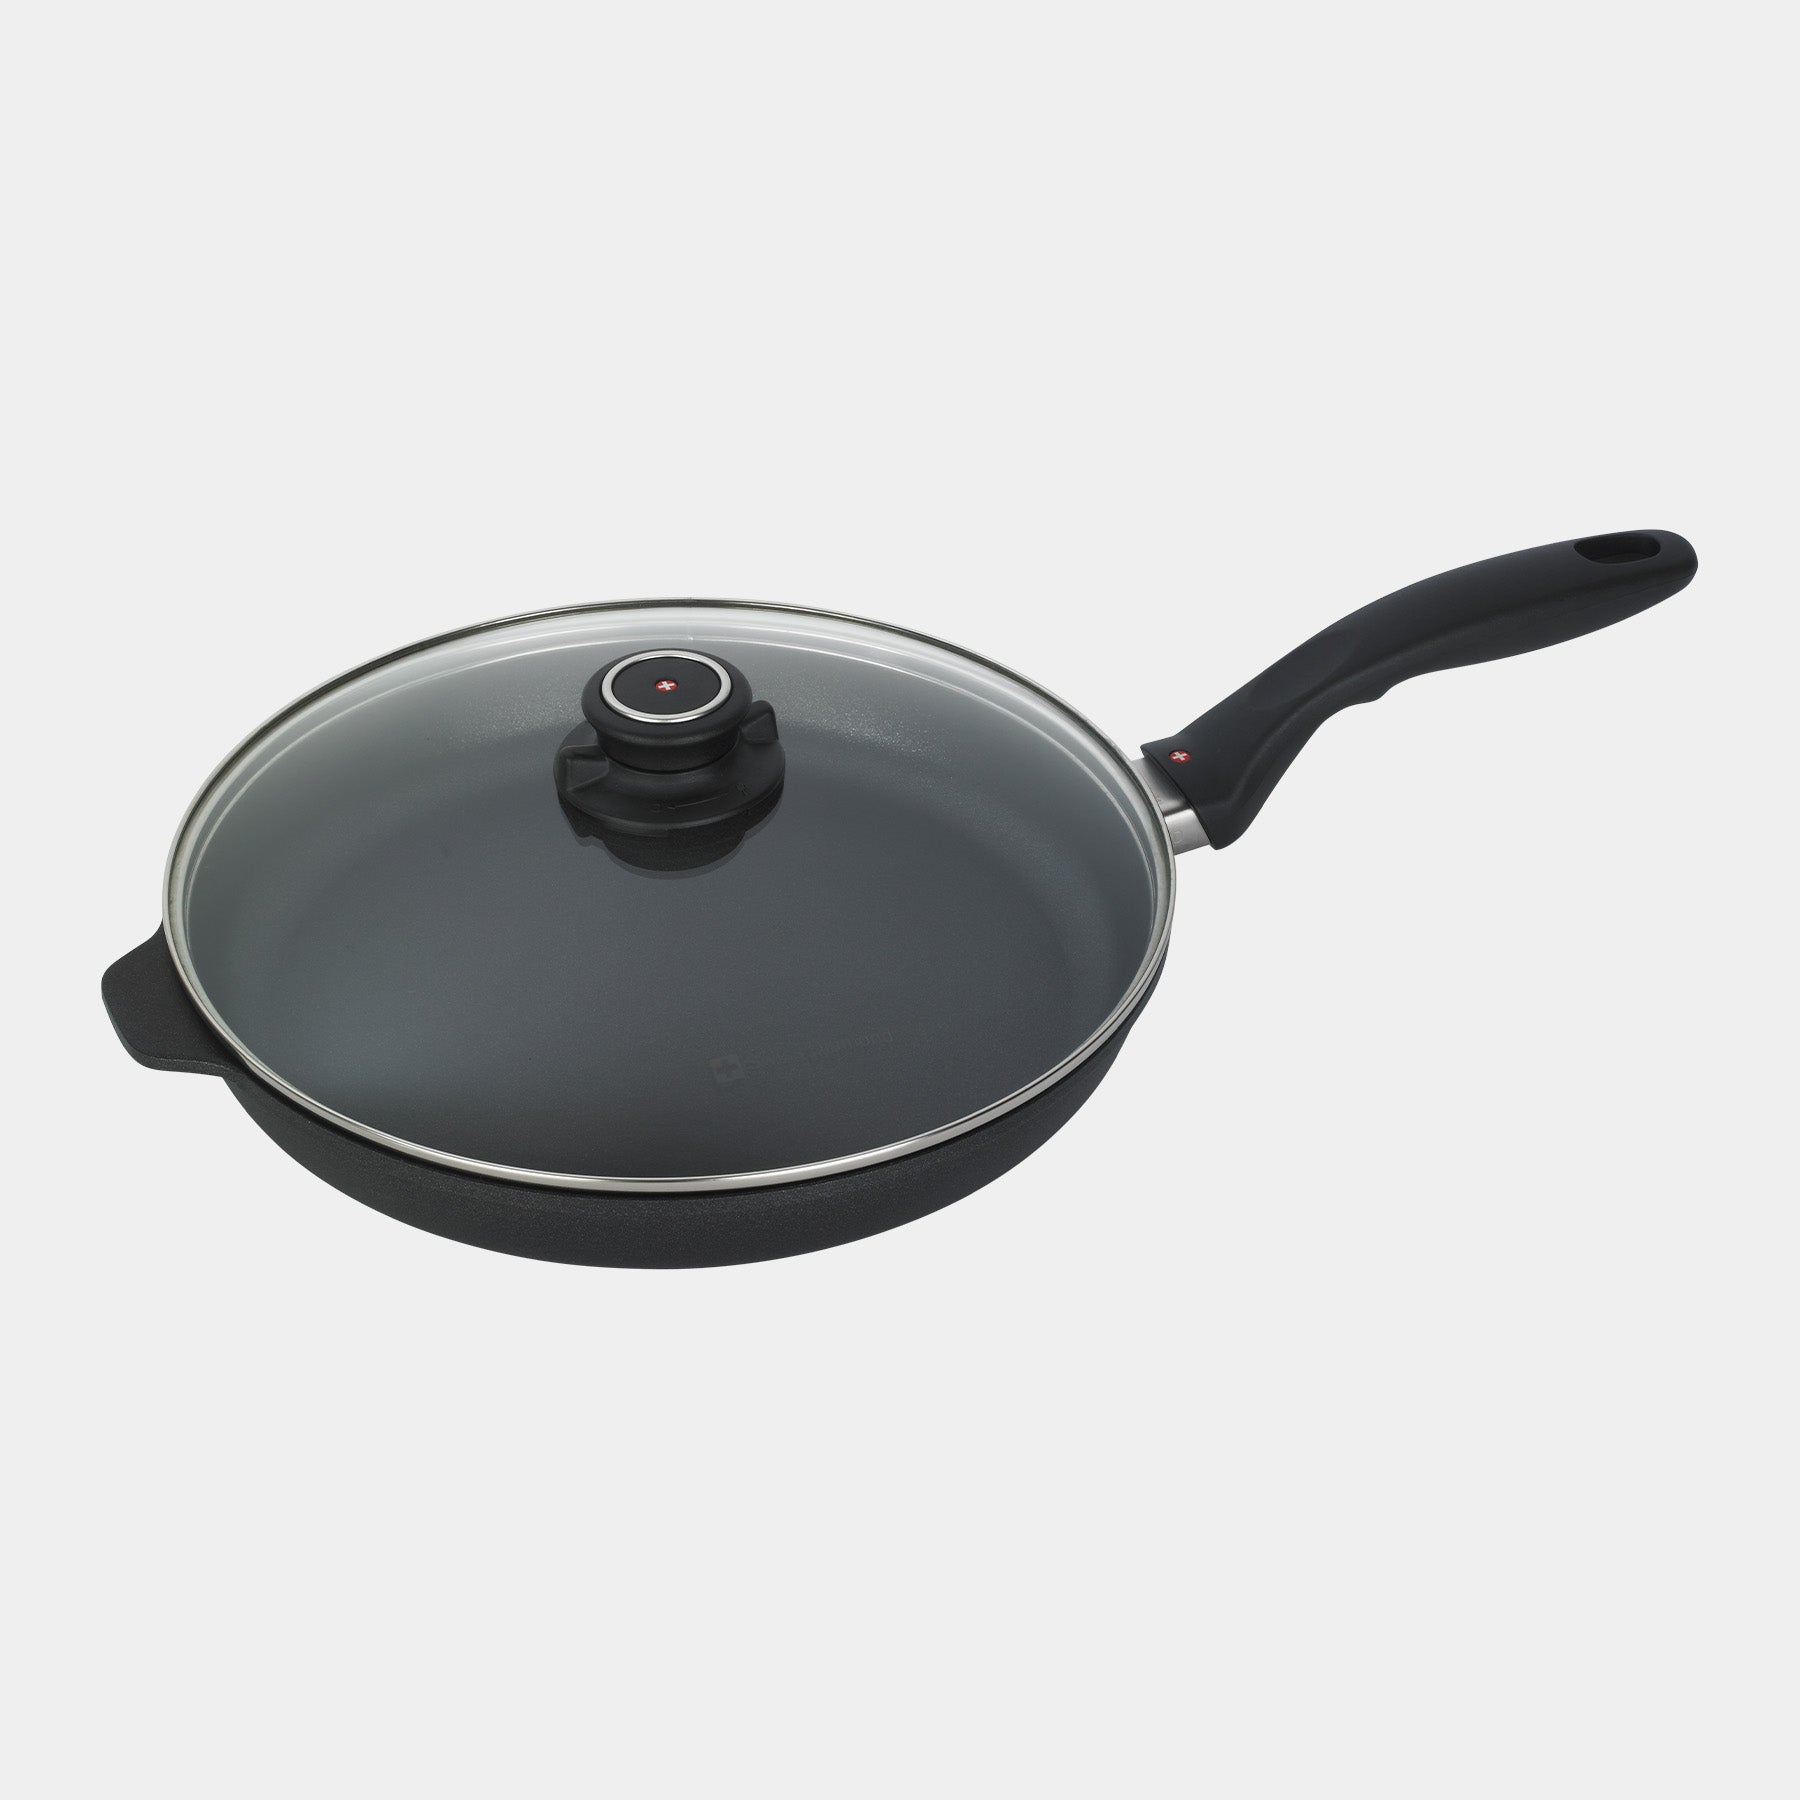 XD Nonstick 11" Fry Pan with glass lid - Induction top view